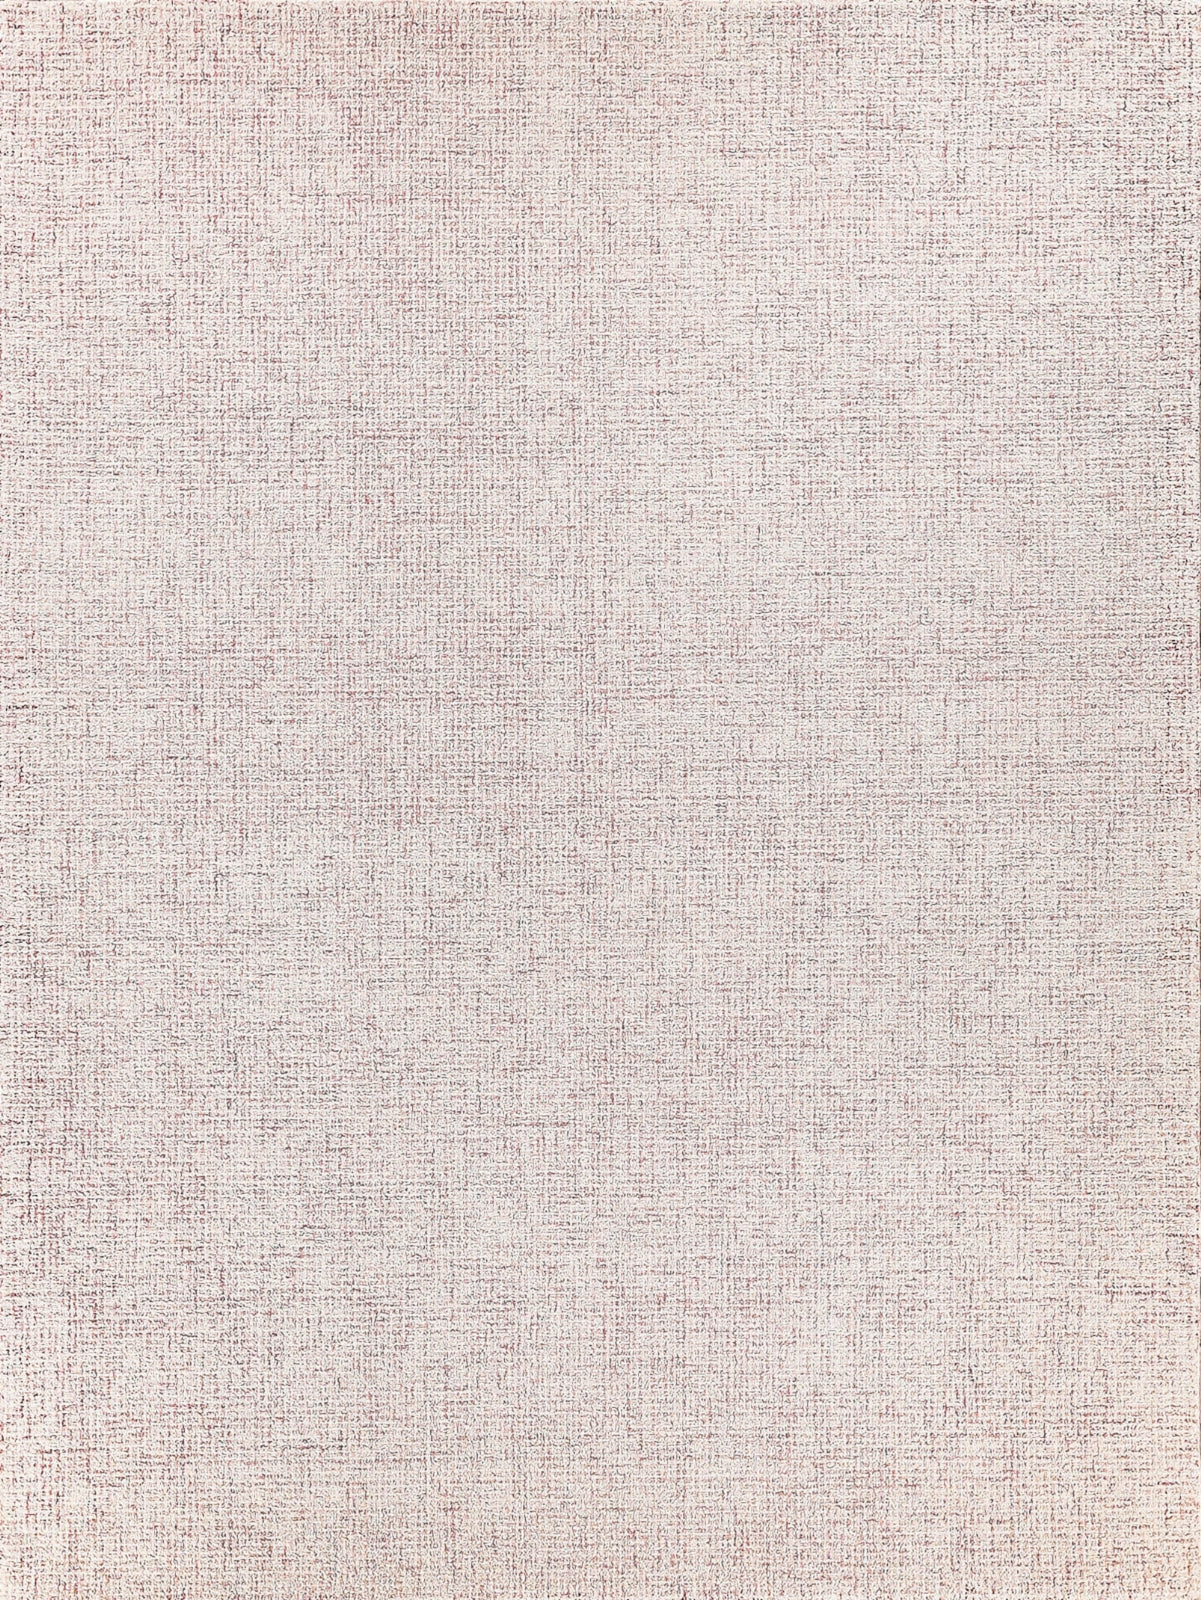 Exquisite Rugs Caprice 4762 Pink/Ivory Area Rug